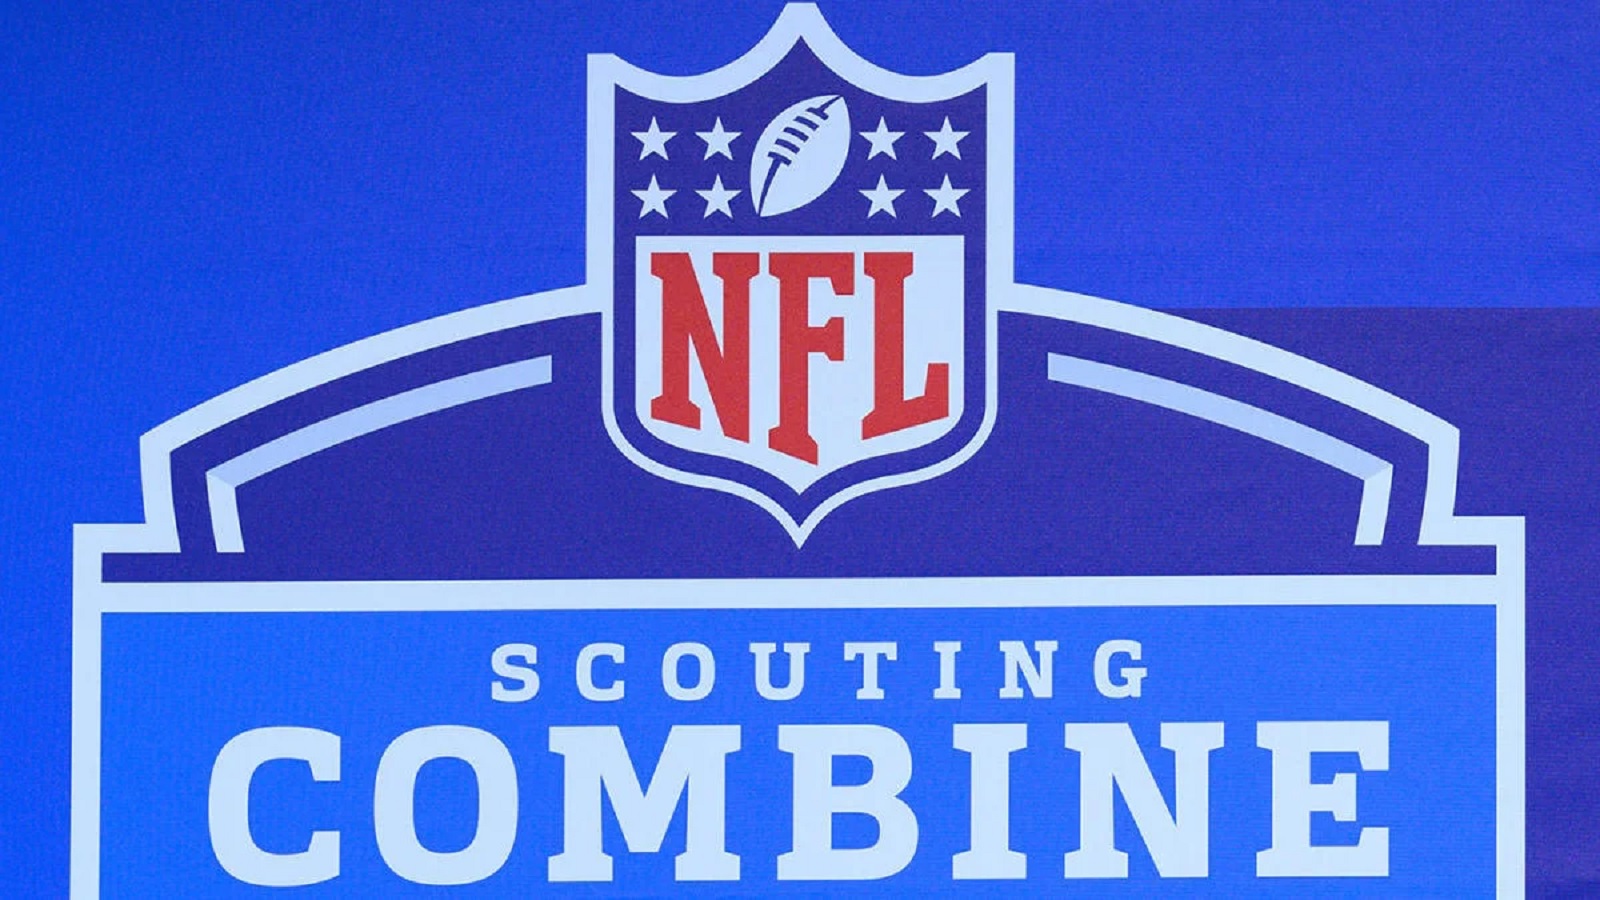 Location for 2025 NFL Scouting Combine revealed